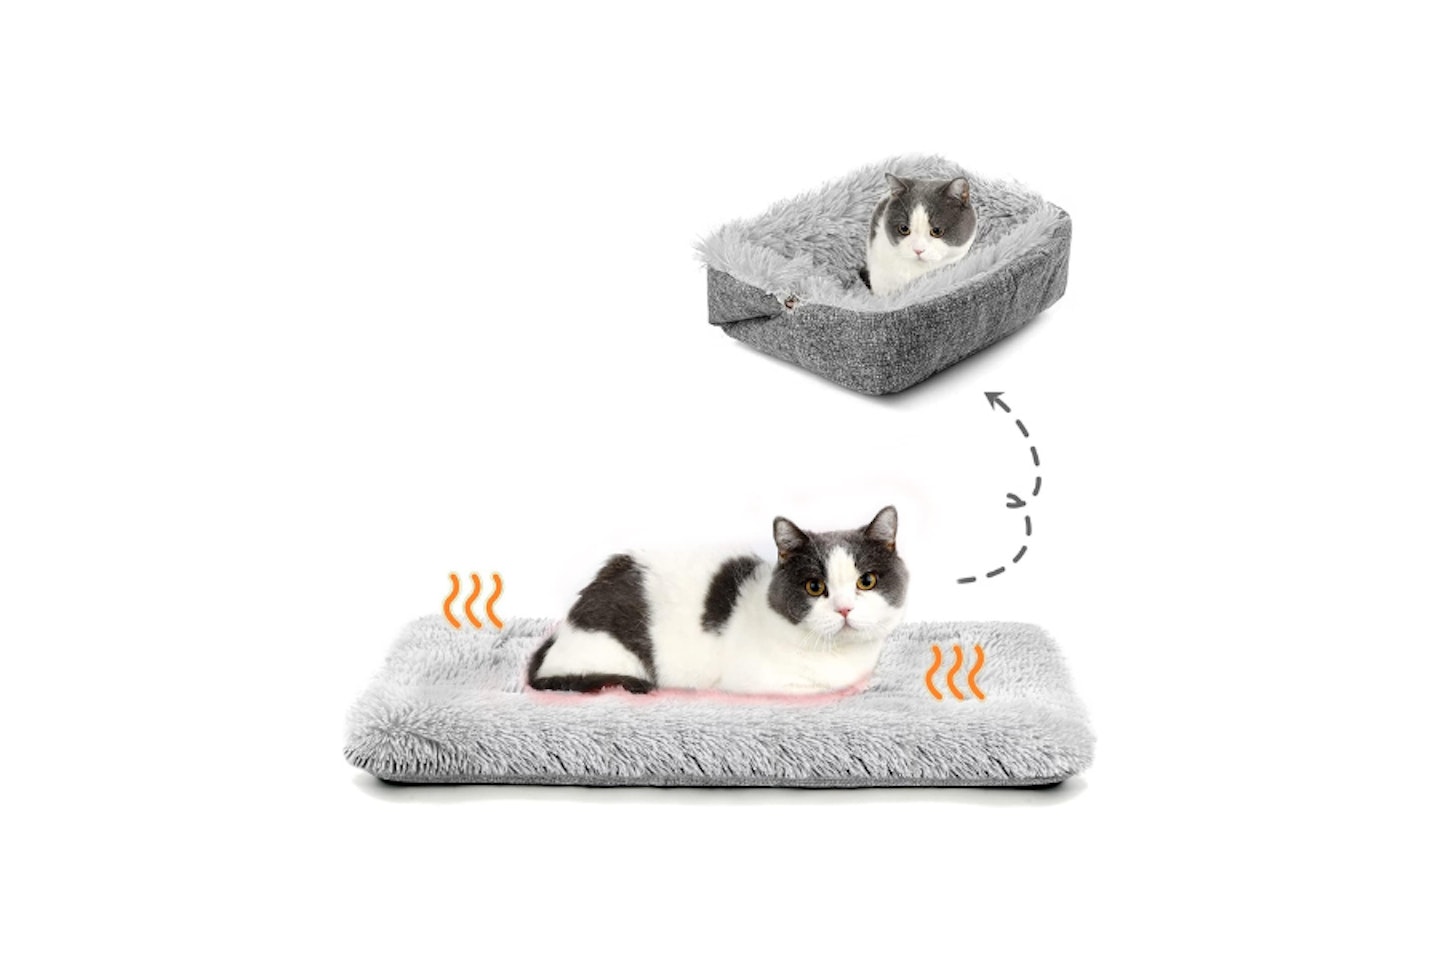 MUAEEOK Cat Bed Small Dog Bed, Self Warming Cat Bed